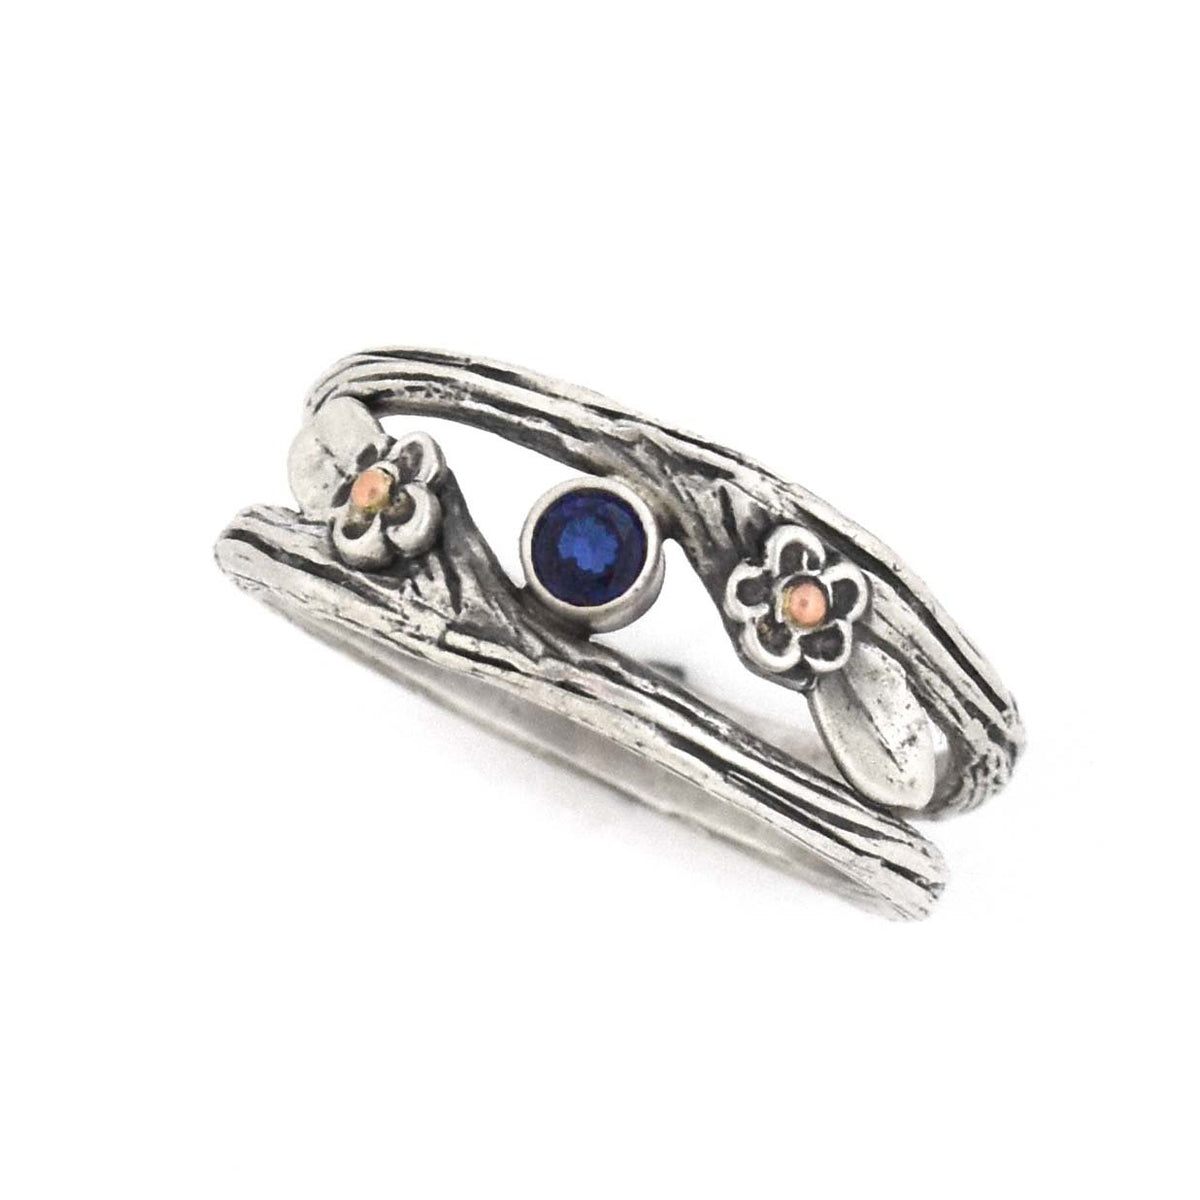 Blossoming Romance Twig Ring - your choice of stone - Wedding Ring Blue Sapphire Teal Montana Sapphire 3897 - handmade by Beth Millner Jewelry